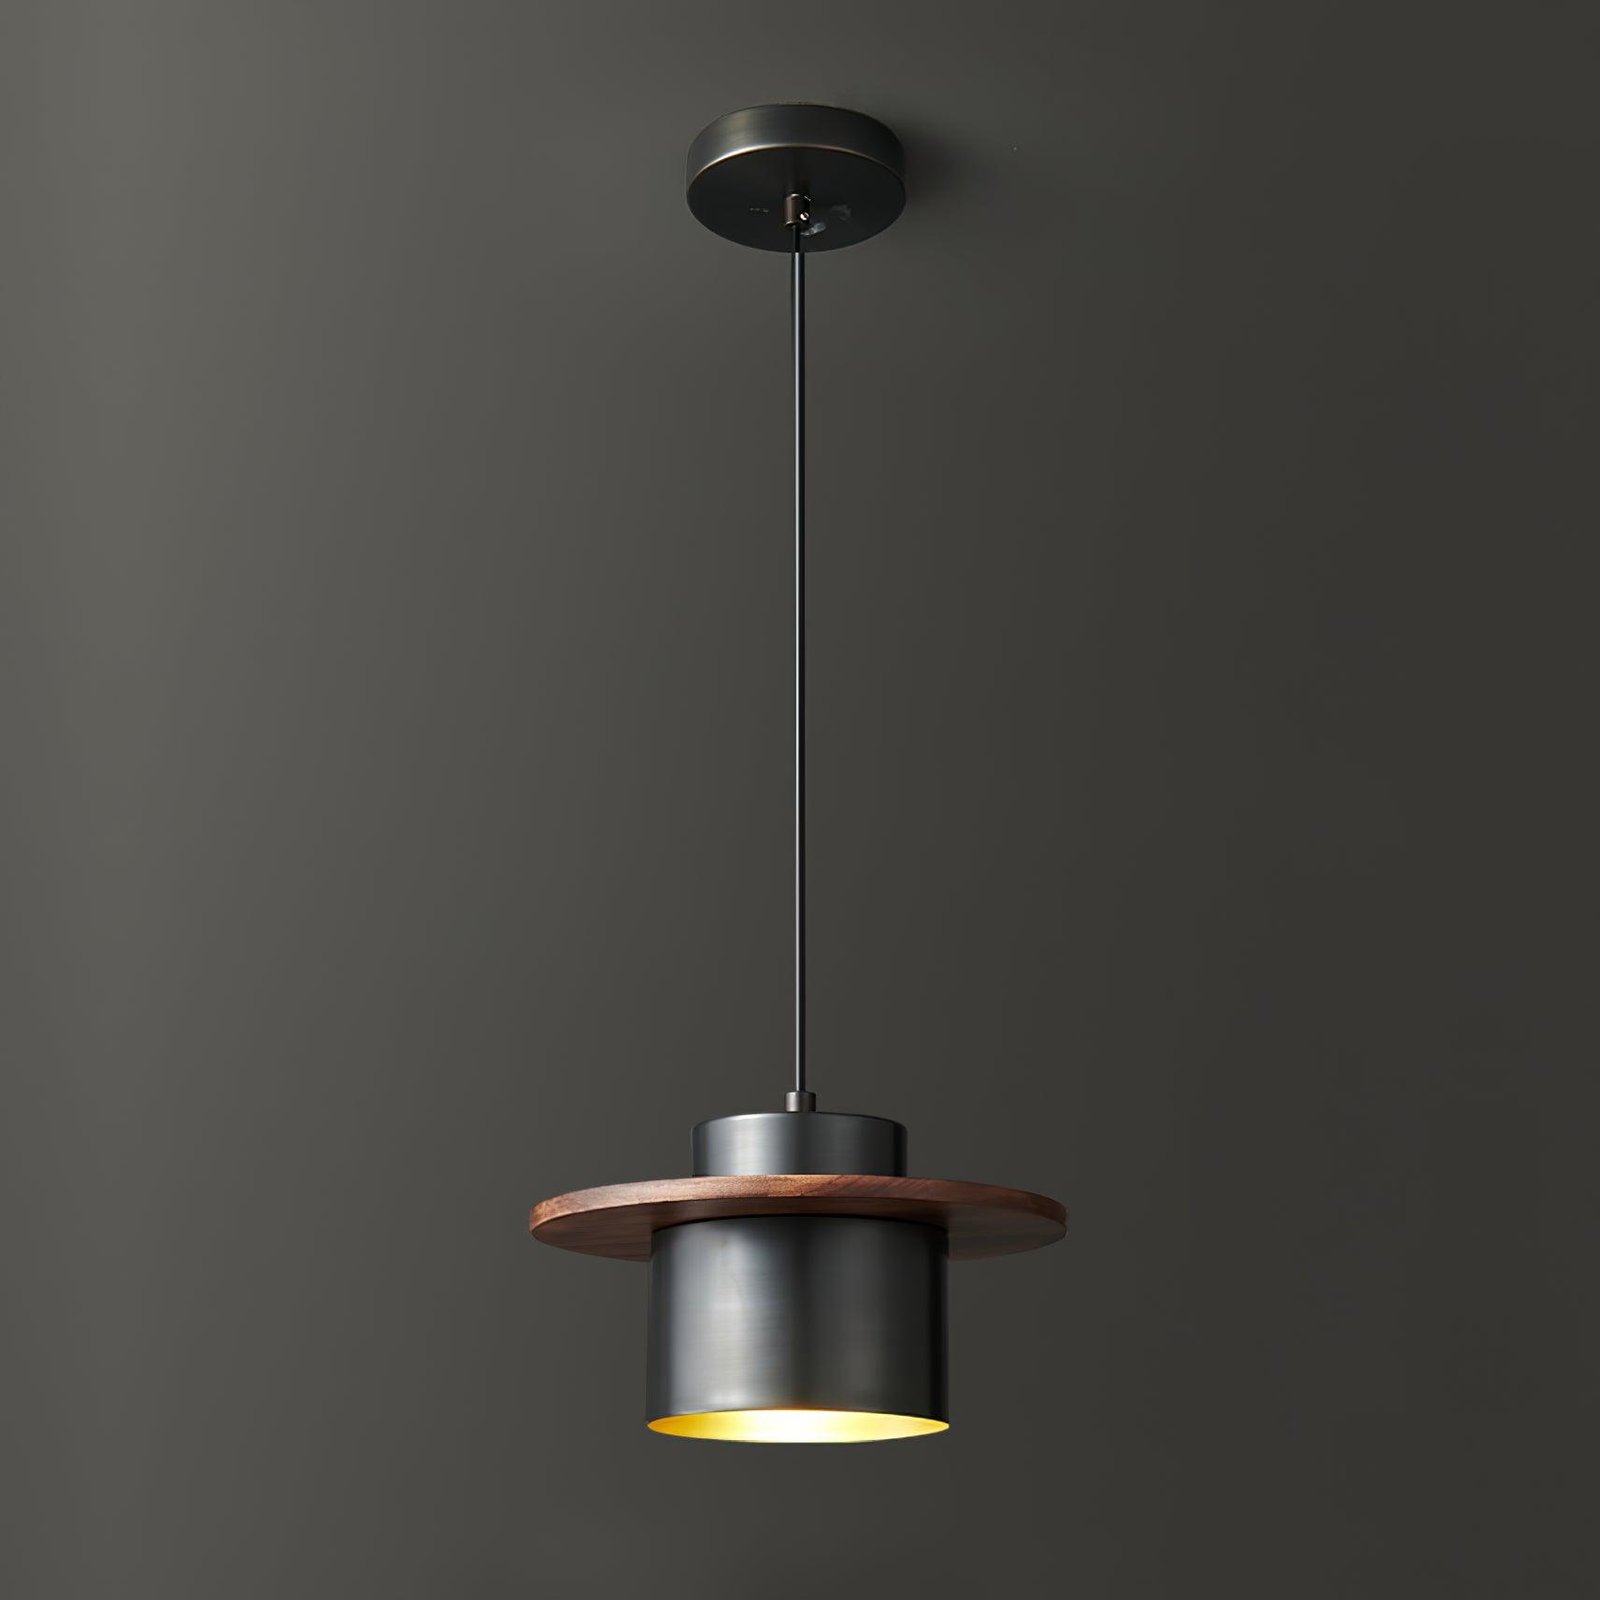 Black+Walnut Bersi Pendant Light with a diameter of 7.9 inches and a height of 3.9 inches, or 20cm x 10cm.